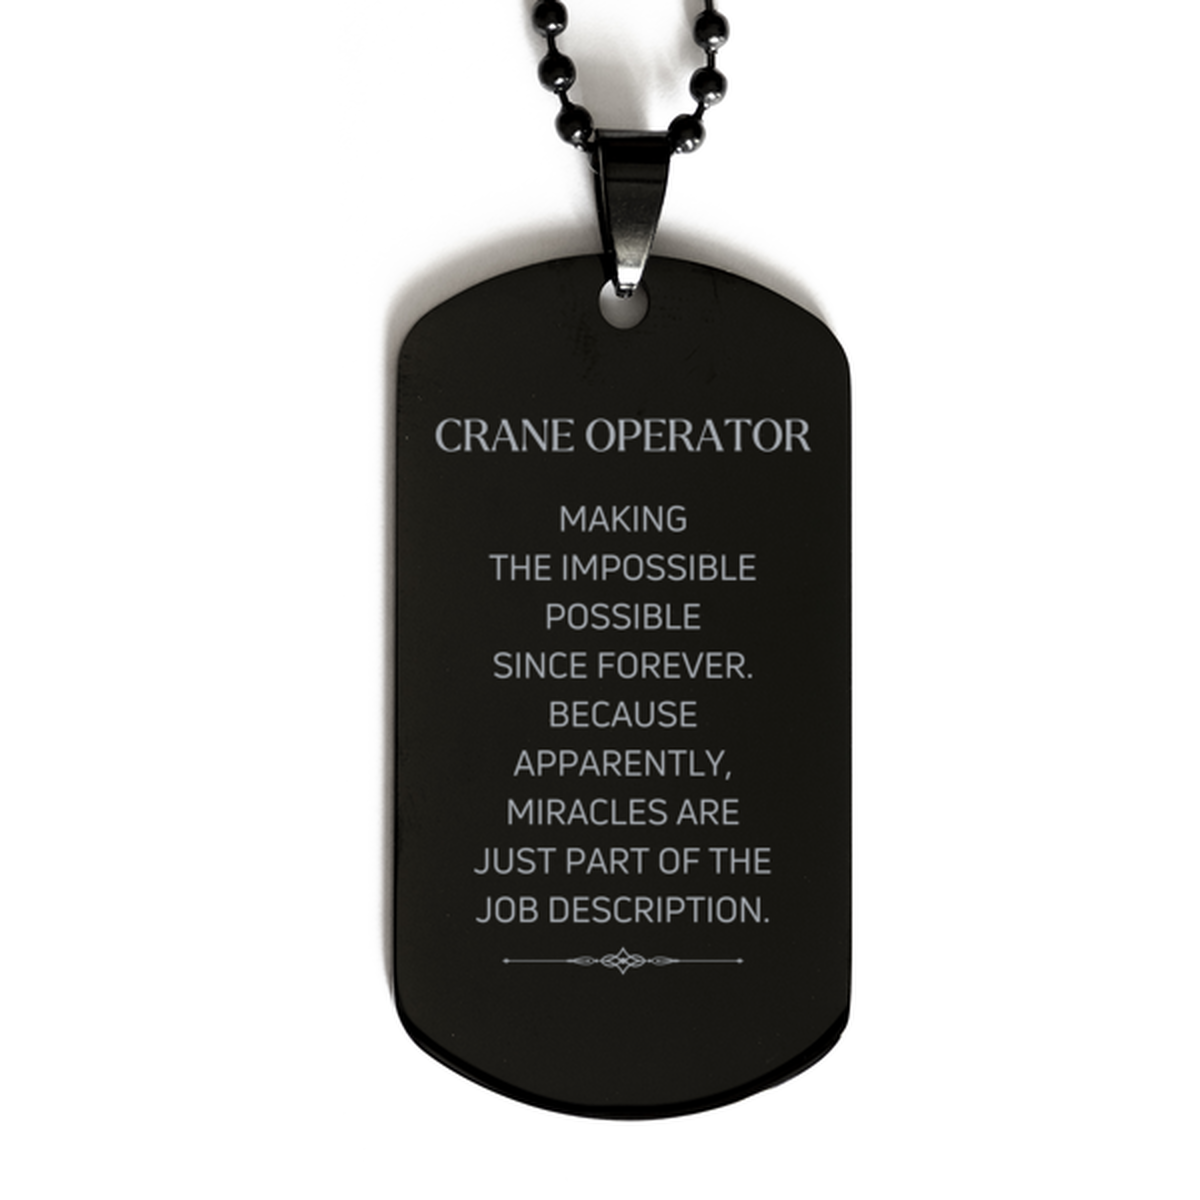 Funny Crane Operator Gifts, Miracles are just part of the job description, Inspirational Birthday Black Dog Tag For Crane Operator, Men, Women, Coworkers, Friends, Boss